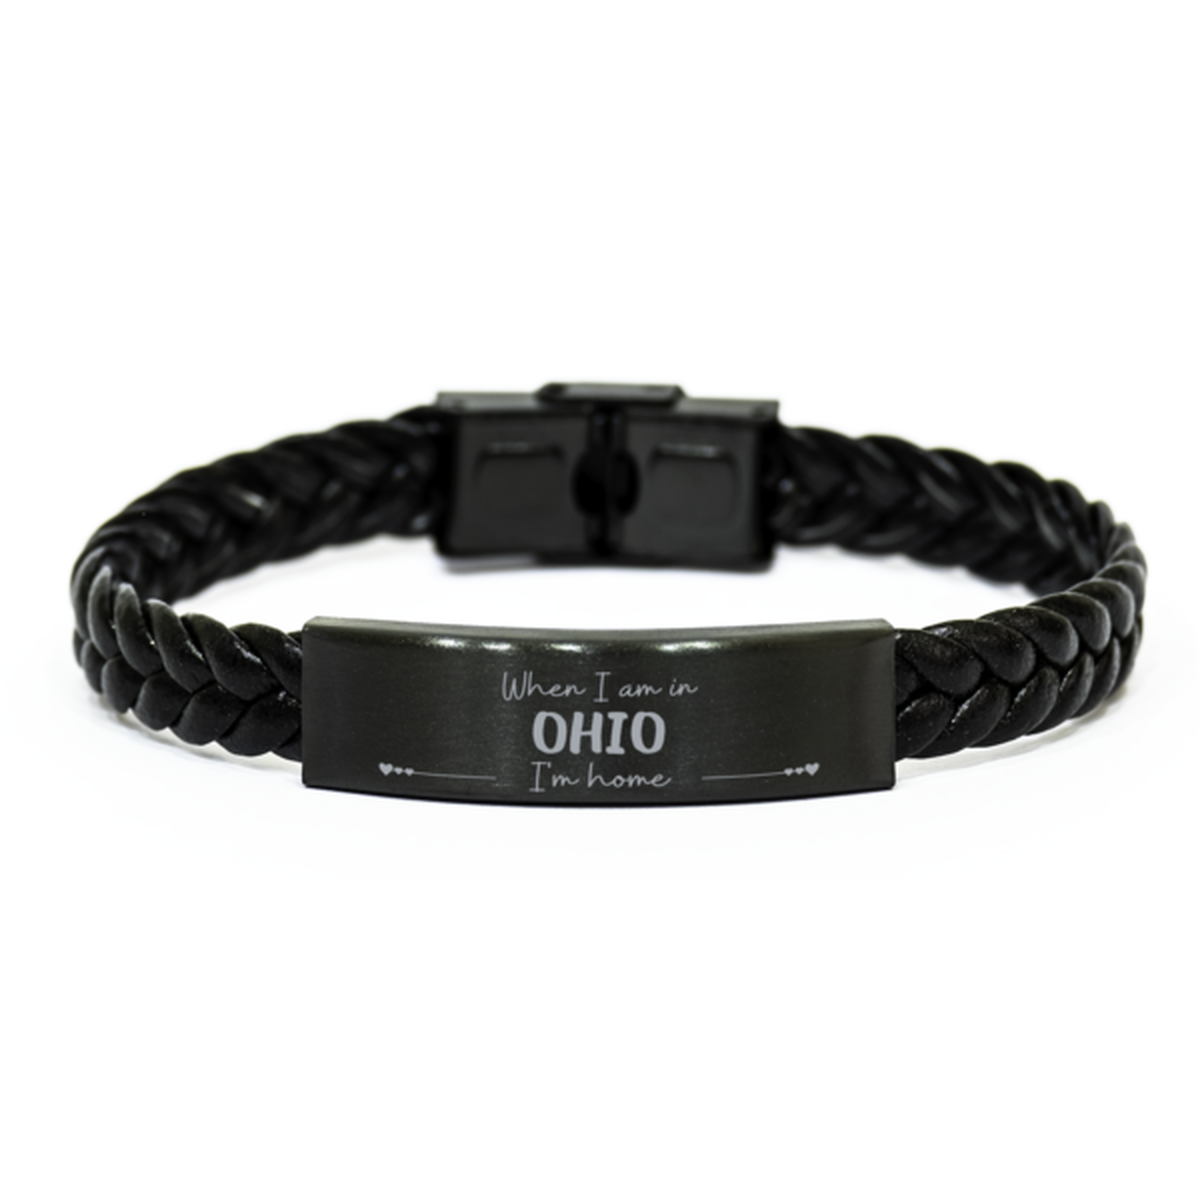 When I am in Ohio I'm home Braided Leather Bracelet, Cheap Gifts For Ohio, State Ohio Birthday Gifts for Friends Coworker